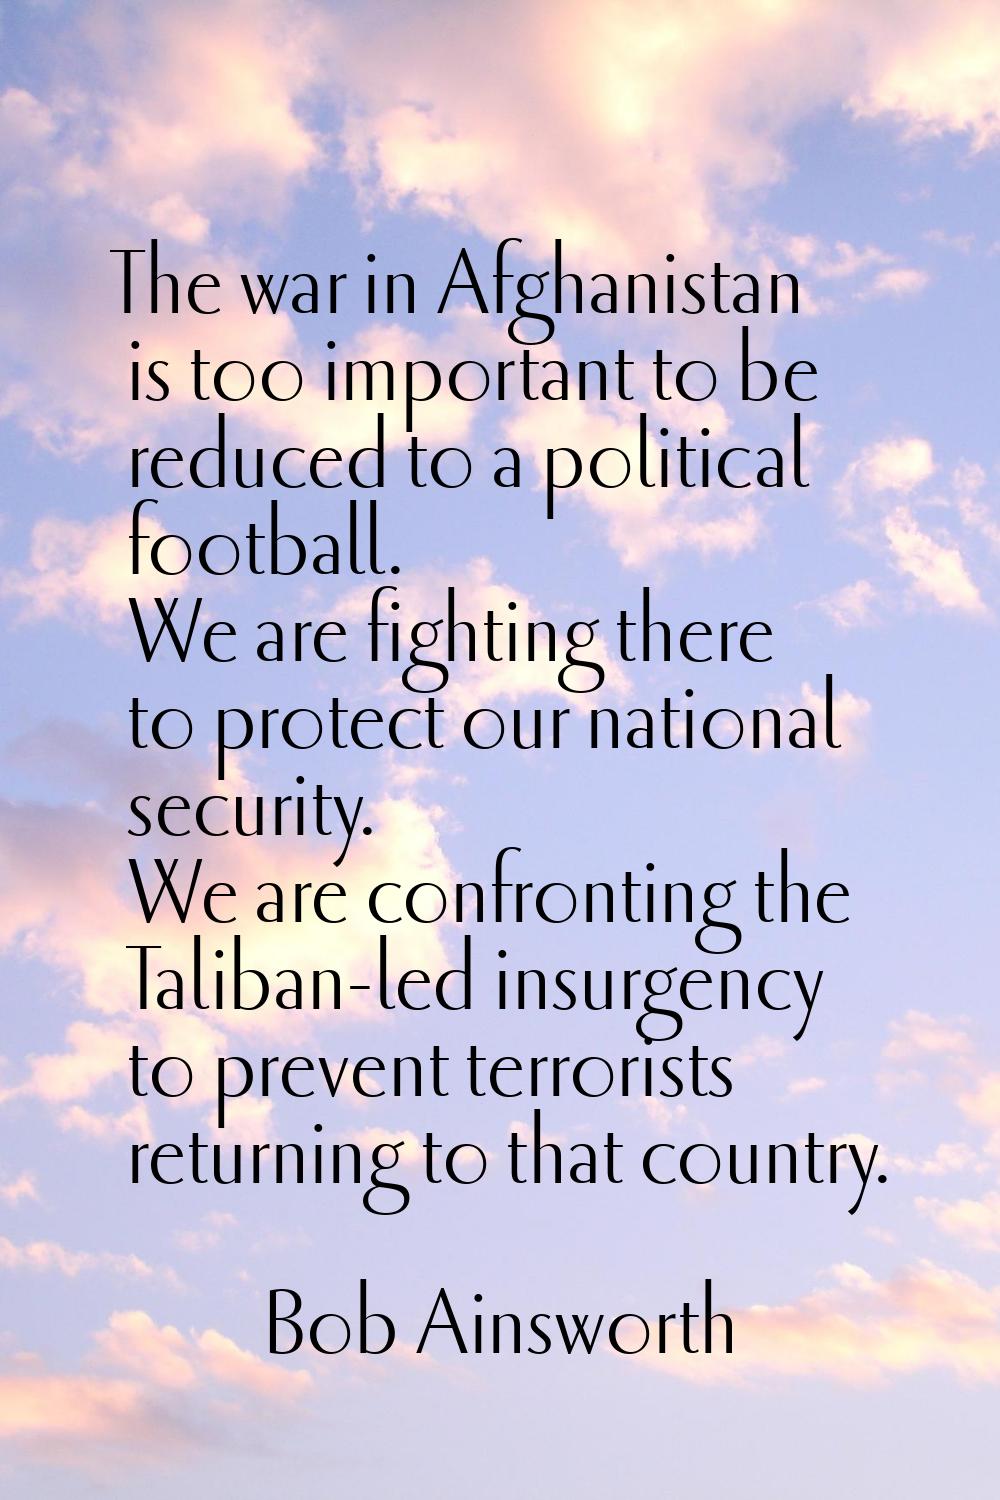 The war in Afghanistan is too important to be reduced to a political football. We are fighting ther